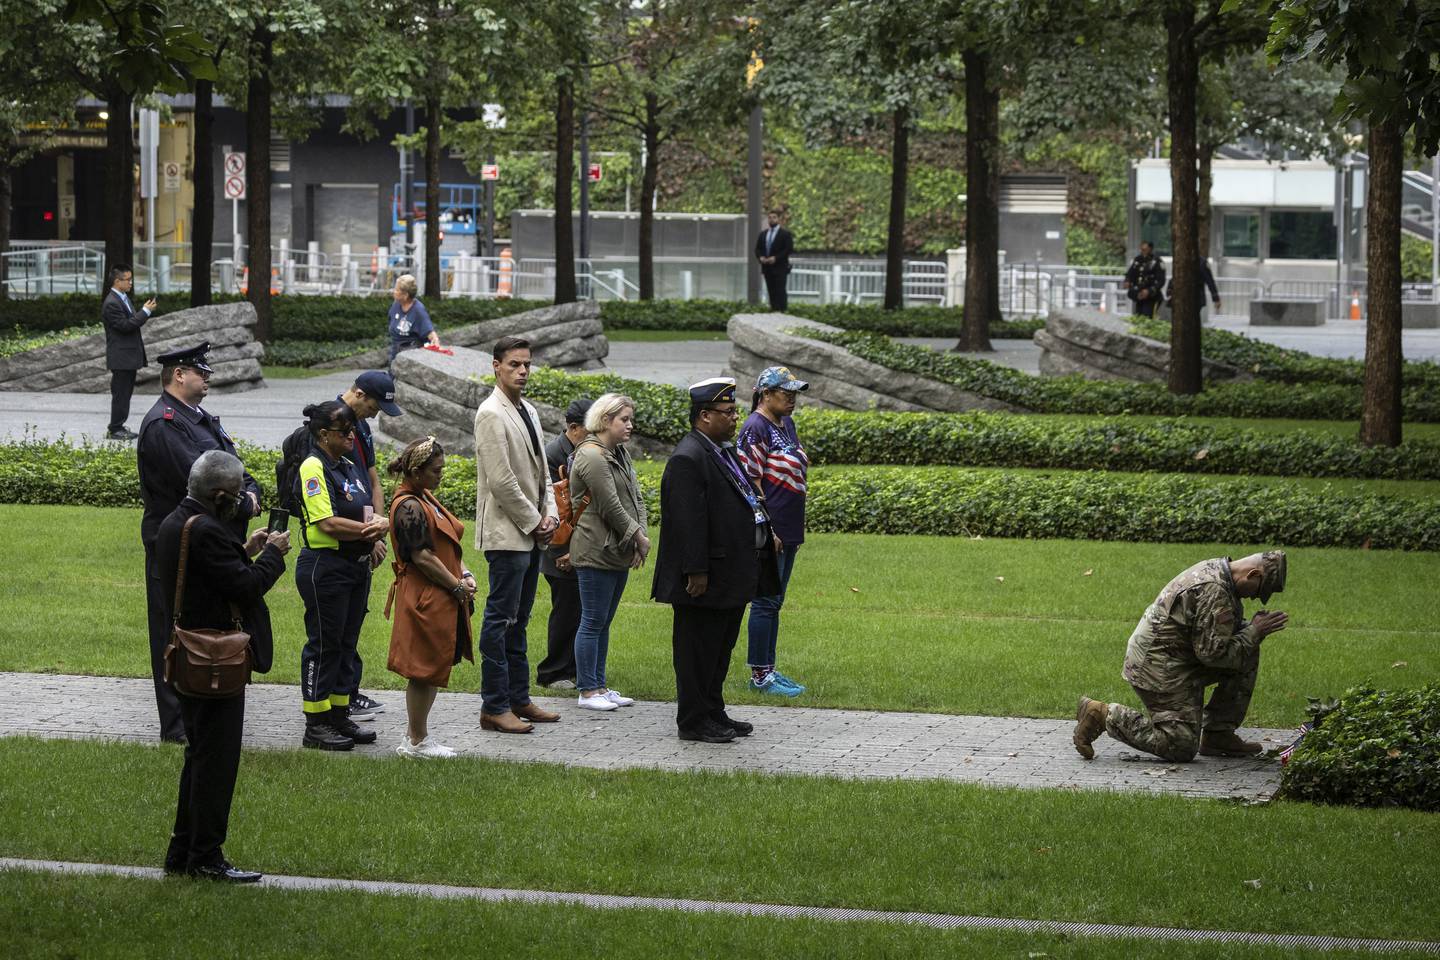 People pray before the commemoration ceremony on the 22nd anniversary of the September 11, 2001, terror attacks on Monday, Sept. 11, 2023, in New York.